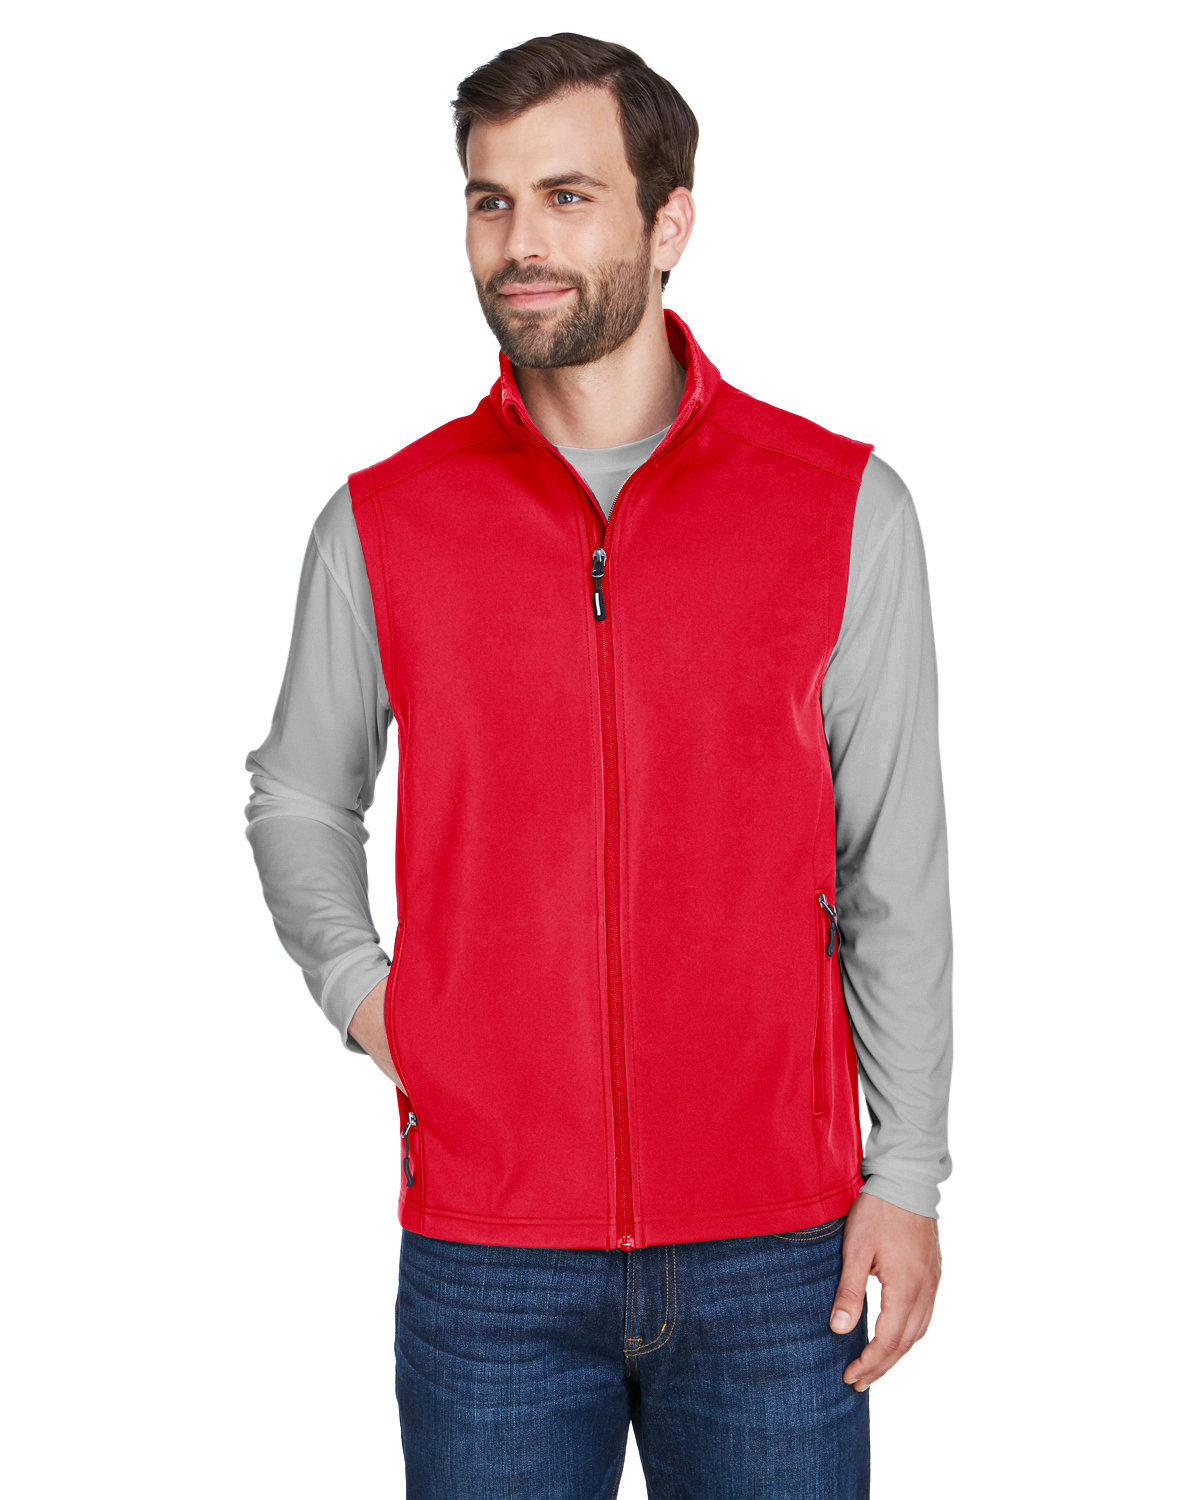 Core 365 Men's Cruise Two-Layer Fleece Bonded Soft Shell Vest CLASSIC RED 